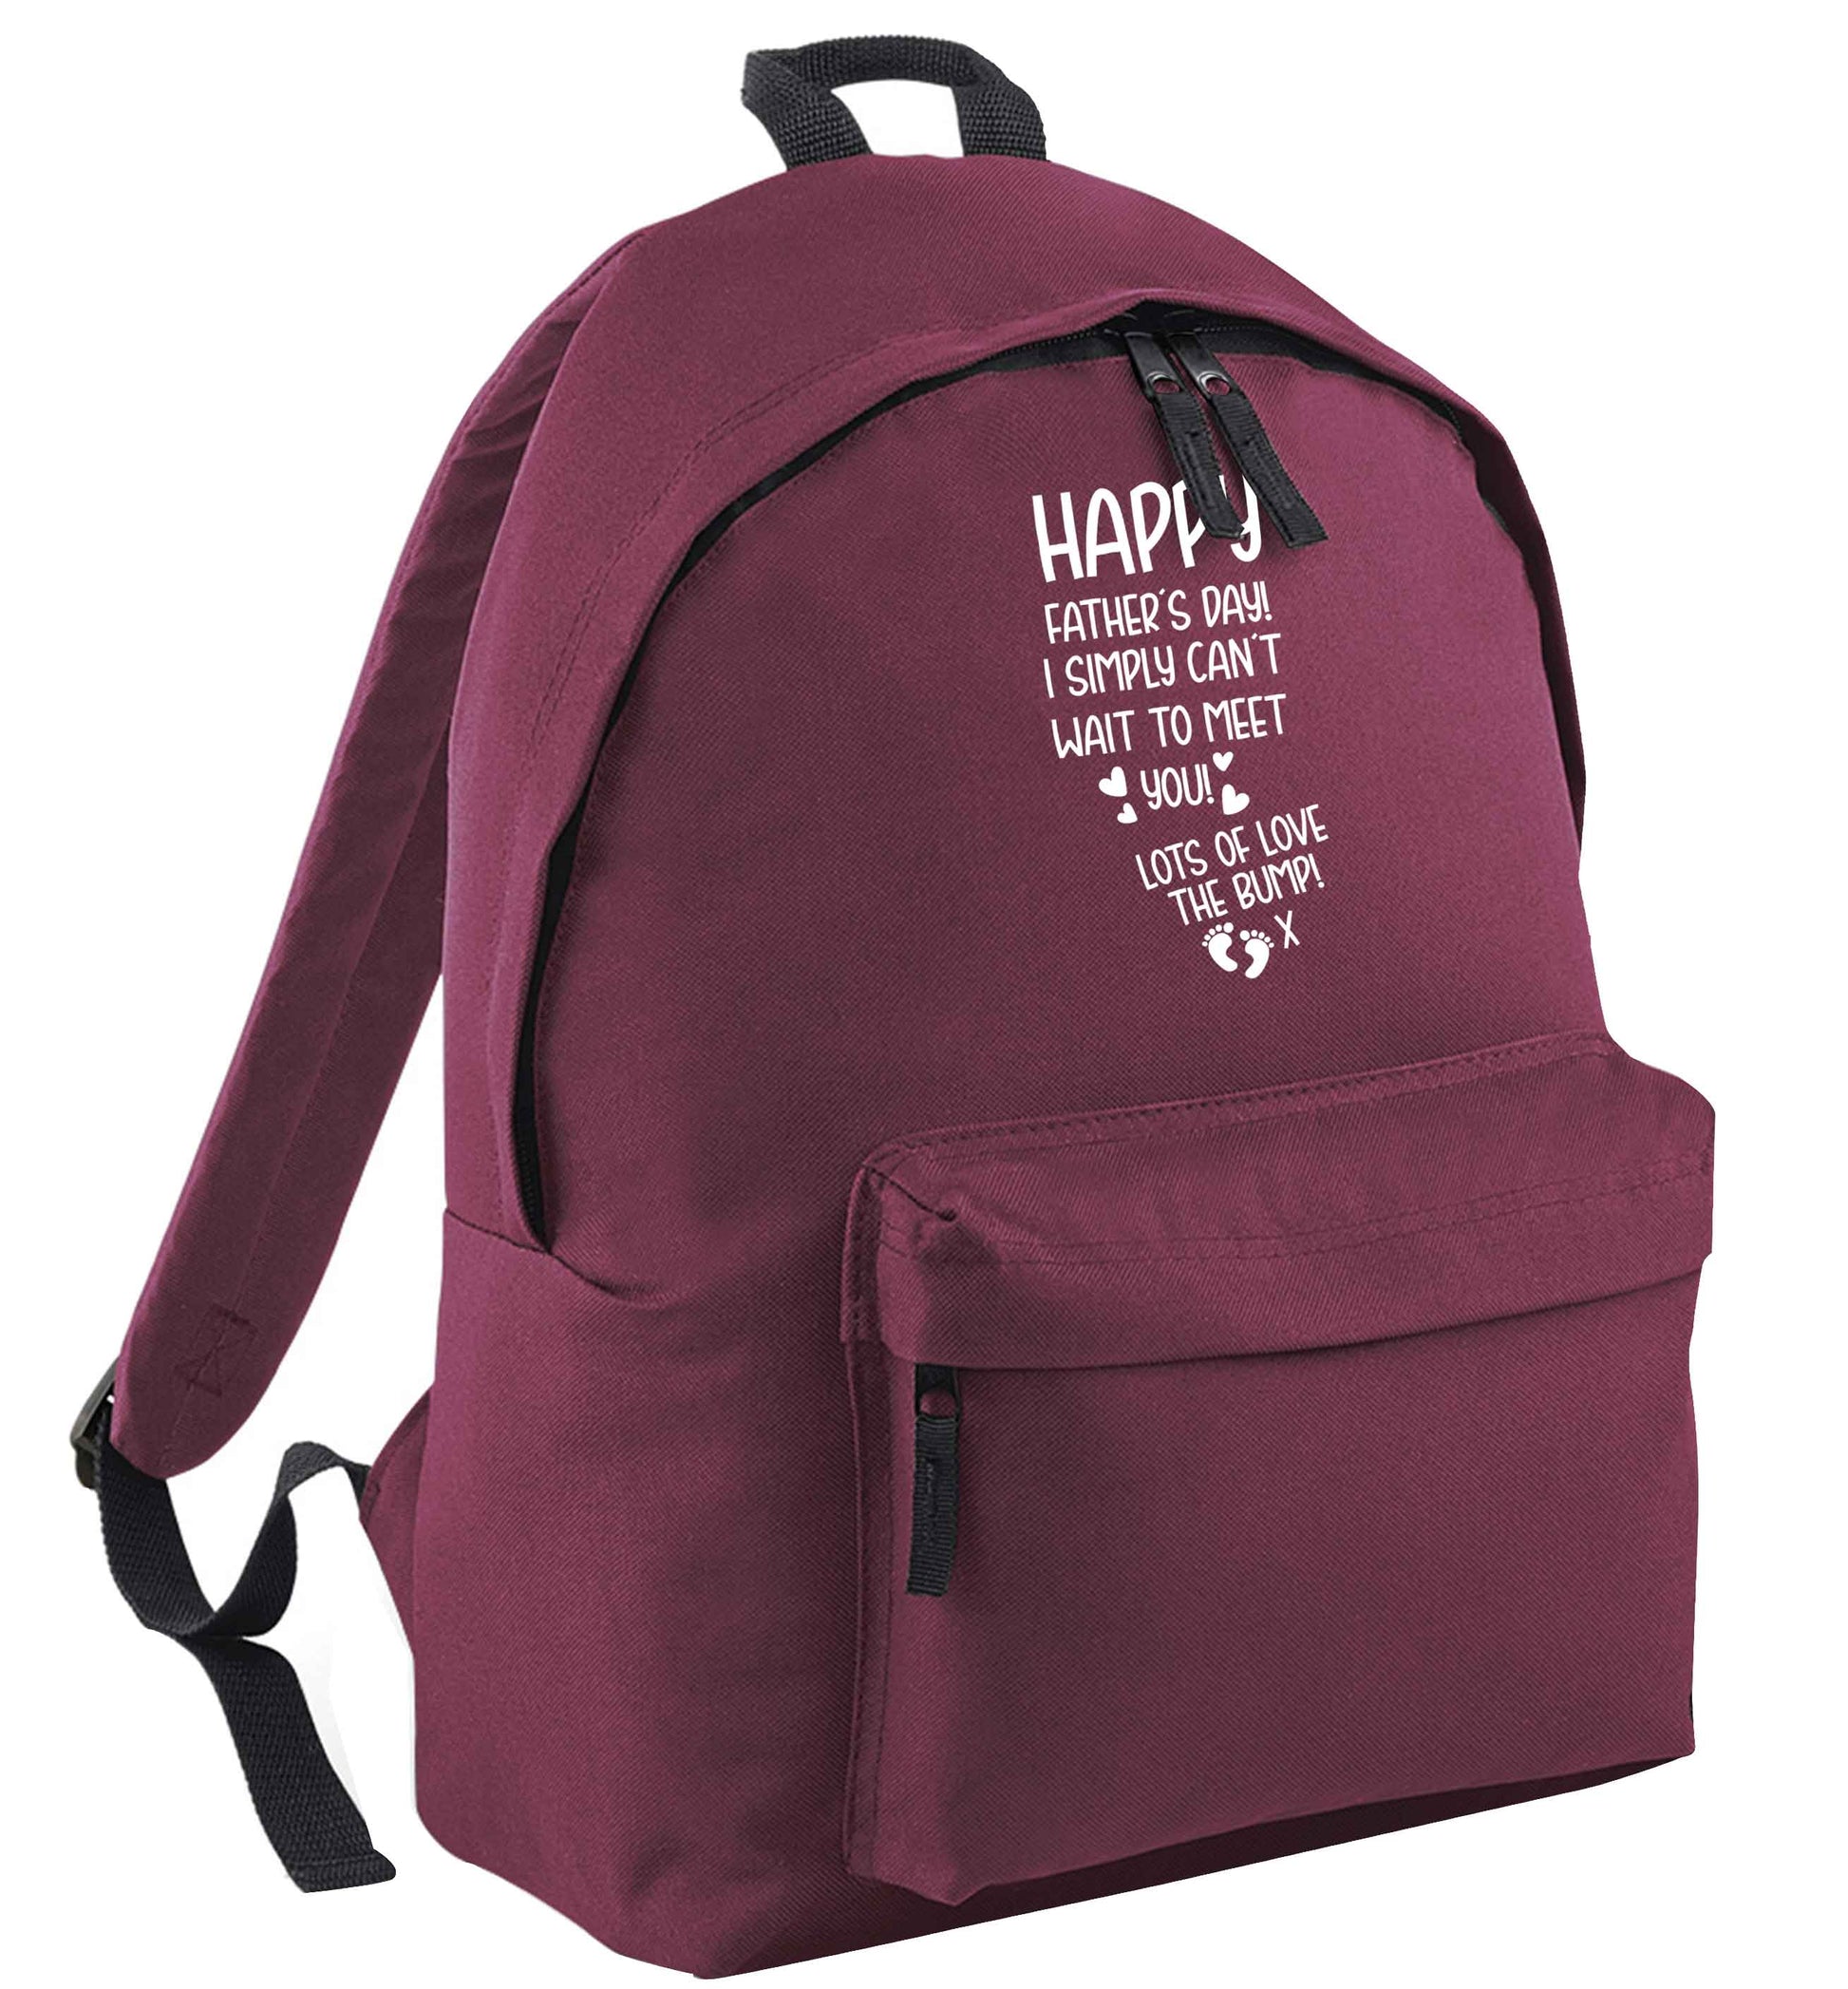 Happy Father's day daddy I can't wait to meet you lot's of love the bump! black adults backpack